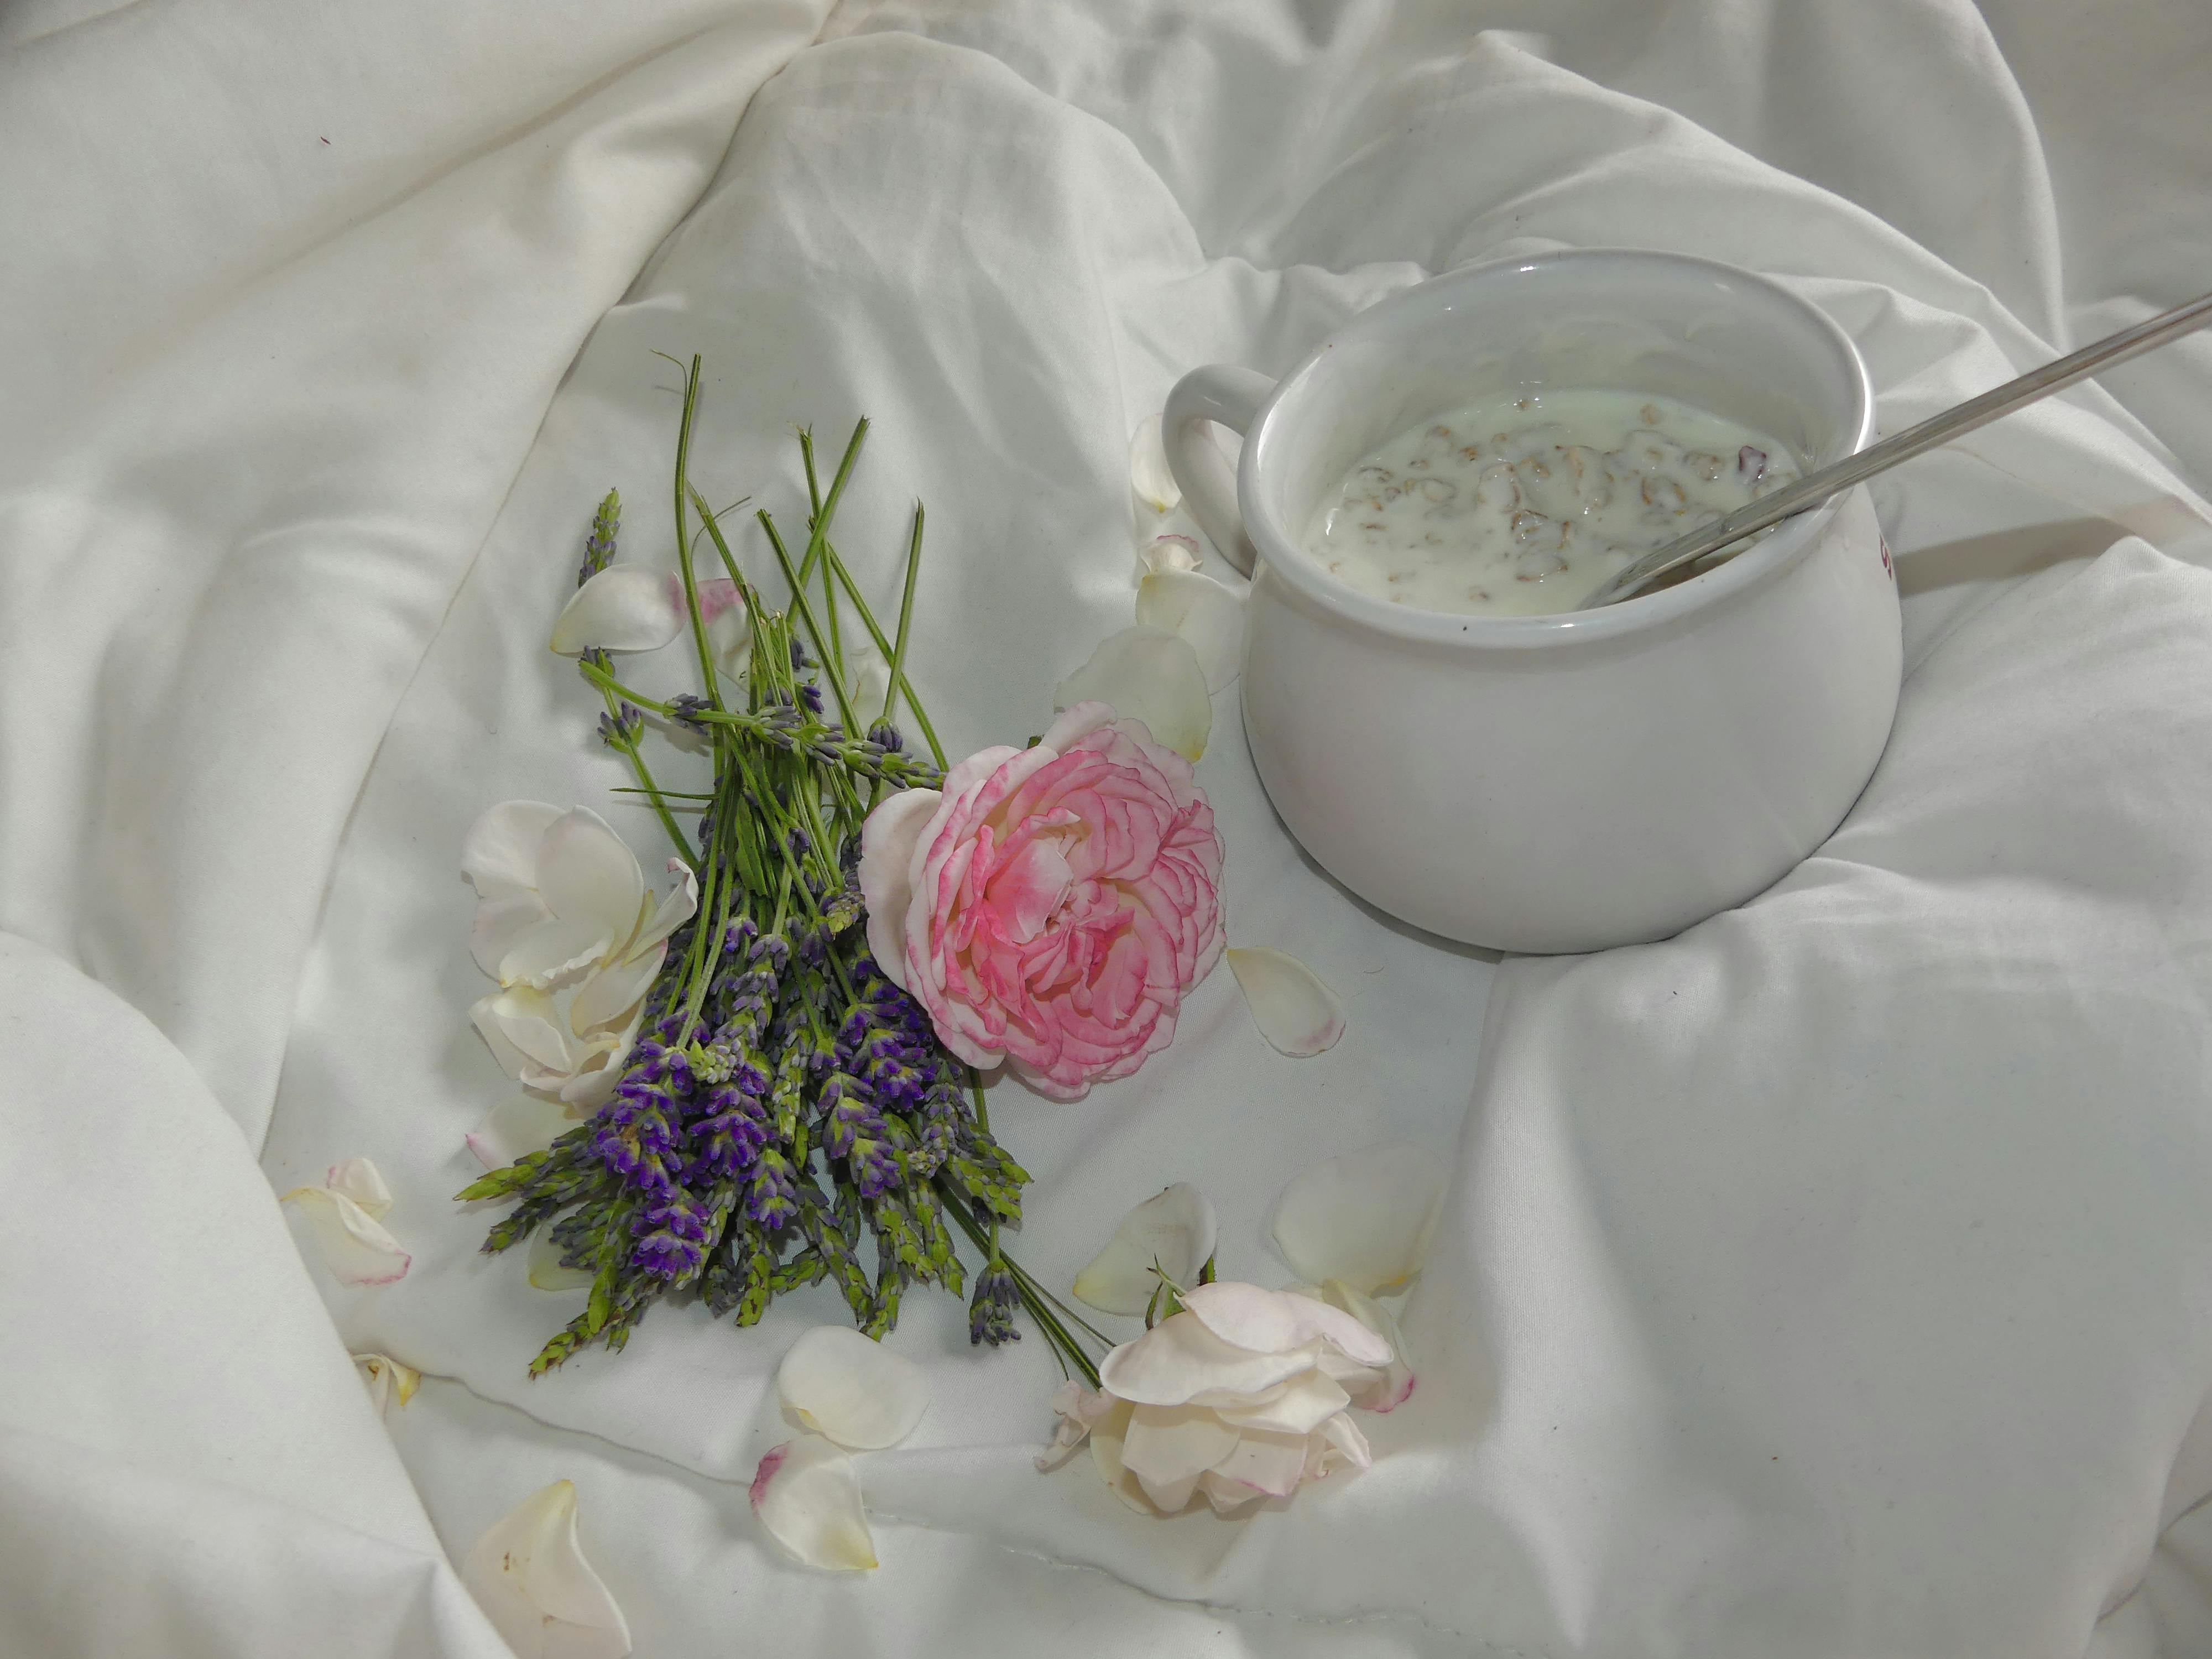 Free stock photo of breakfast in bed, Good Morning, lavender